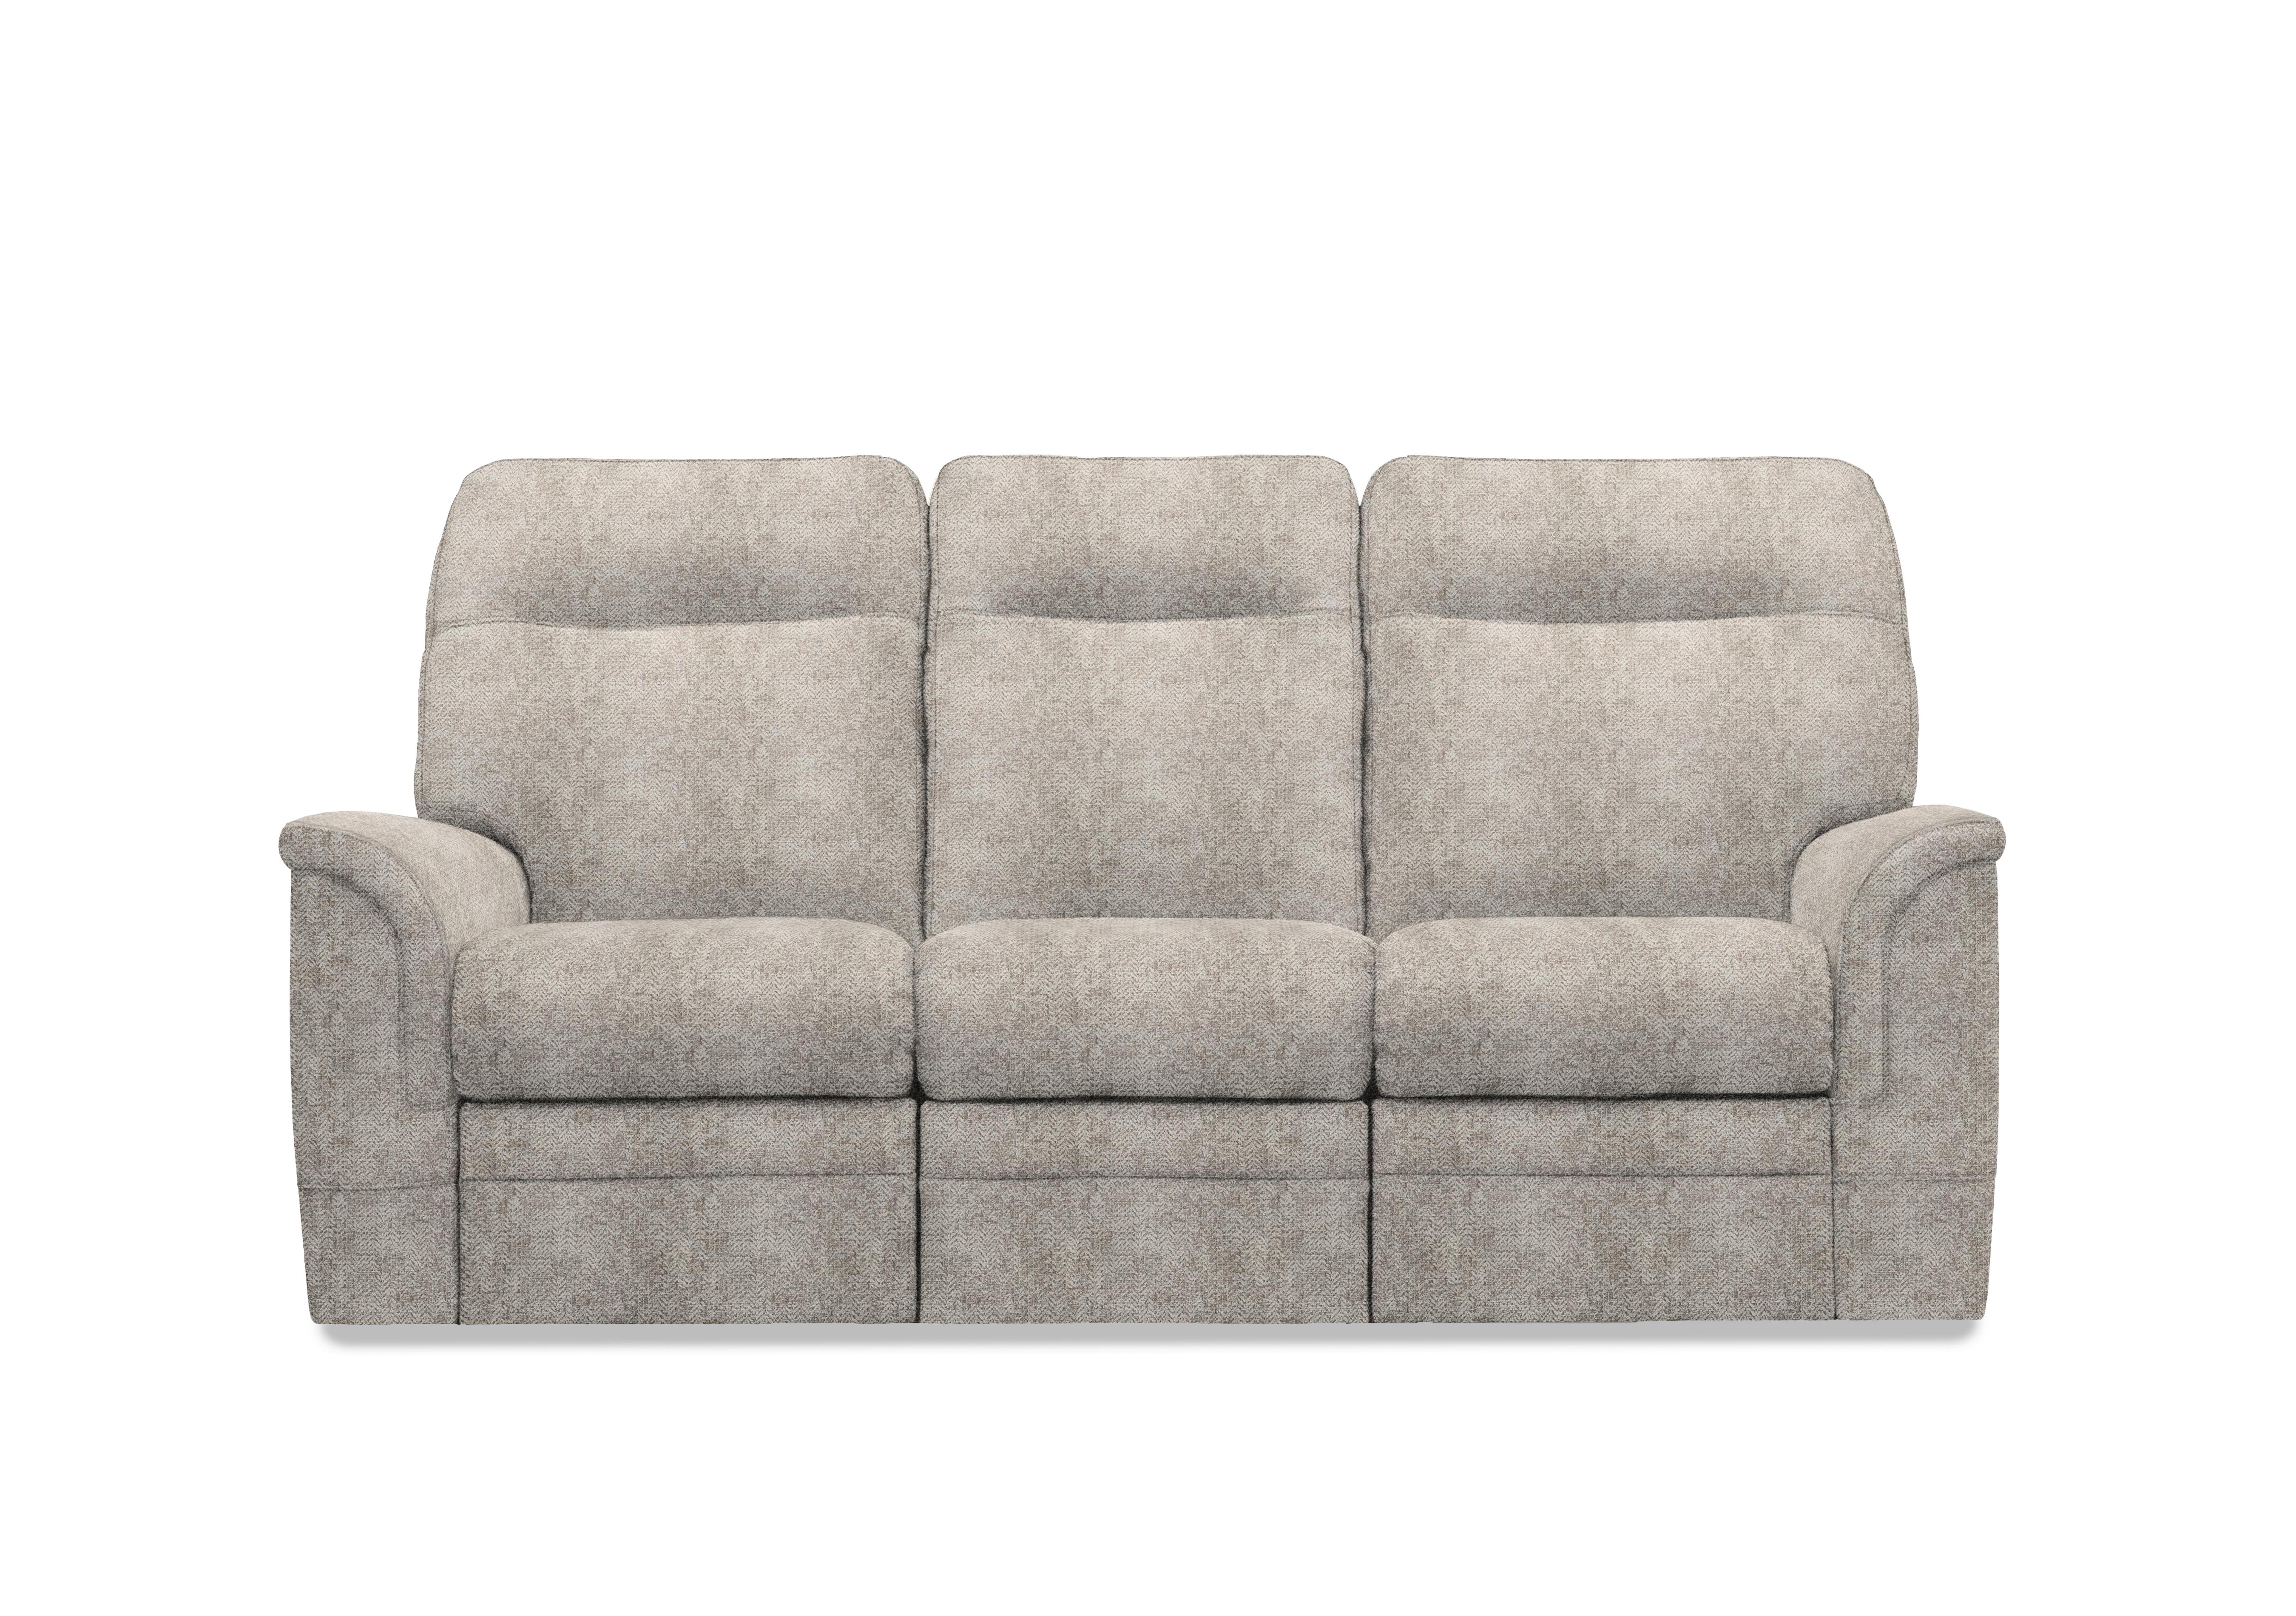 Hudson 23 Fabric 3 Seater Power Recliner Sofa with Power Headrests and Power Lumbar in Ida Stone 006035-0055 on Furniture Village